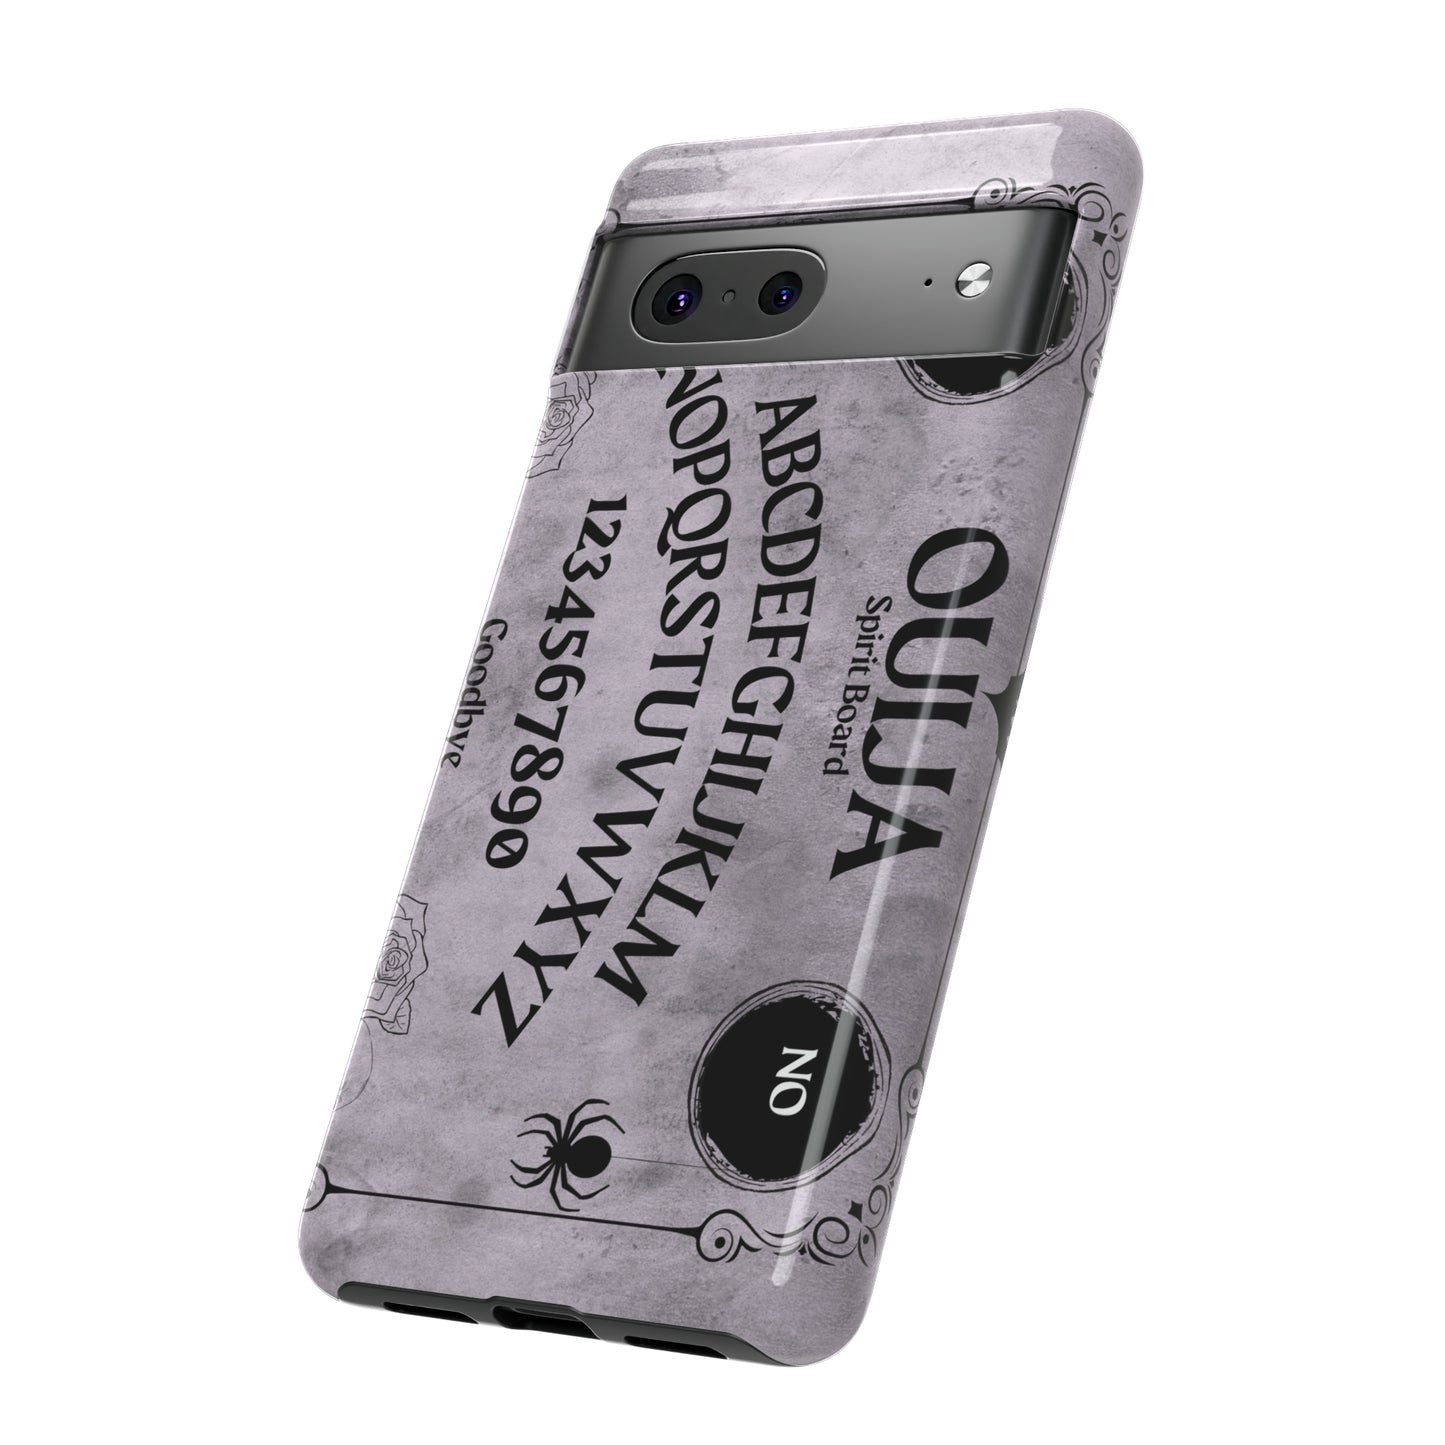 Ouija Board Tough Phone Cases For Samsung iPhone Google